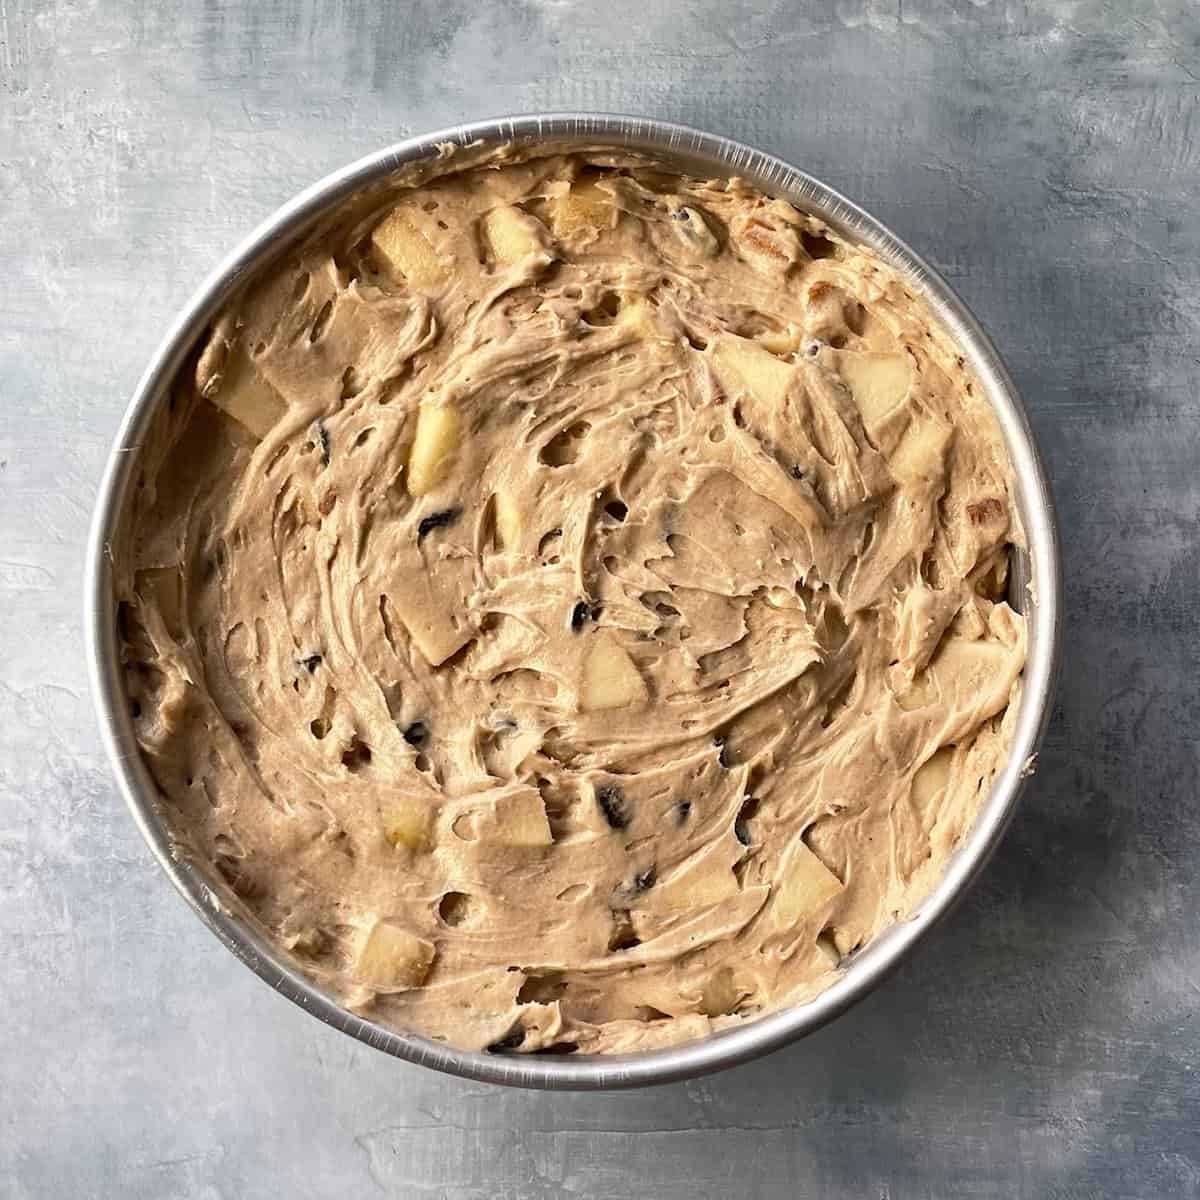 sourdough apple cake batter in a round cake pan.